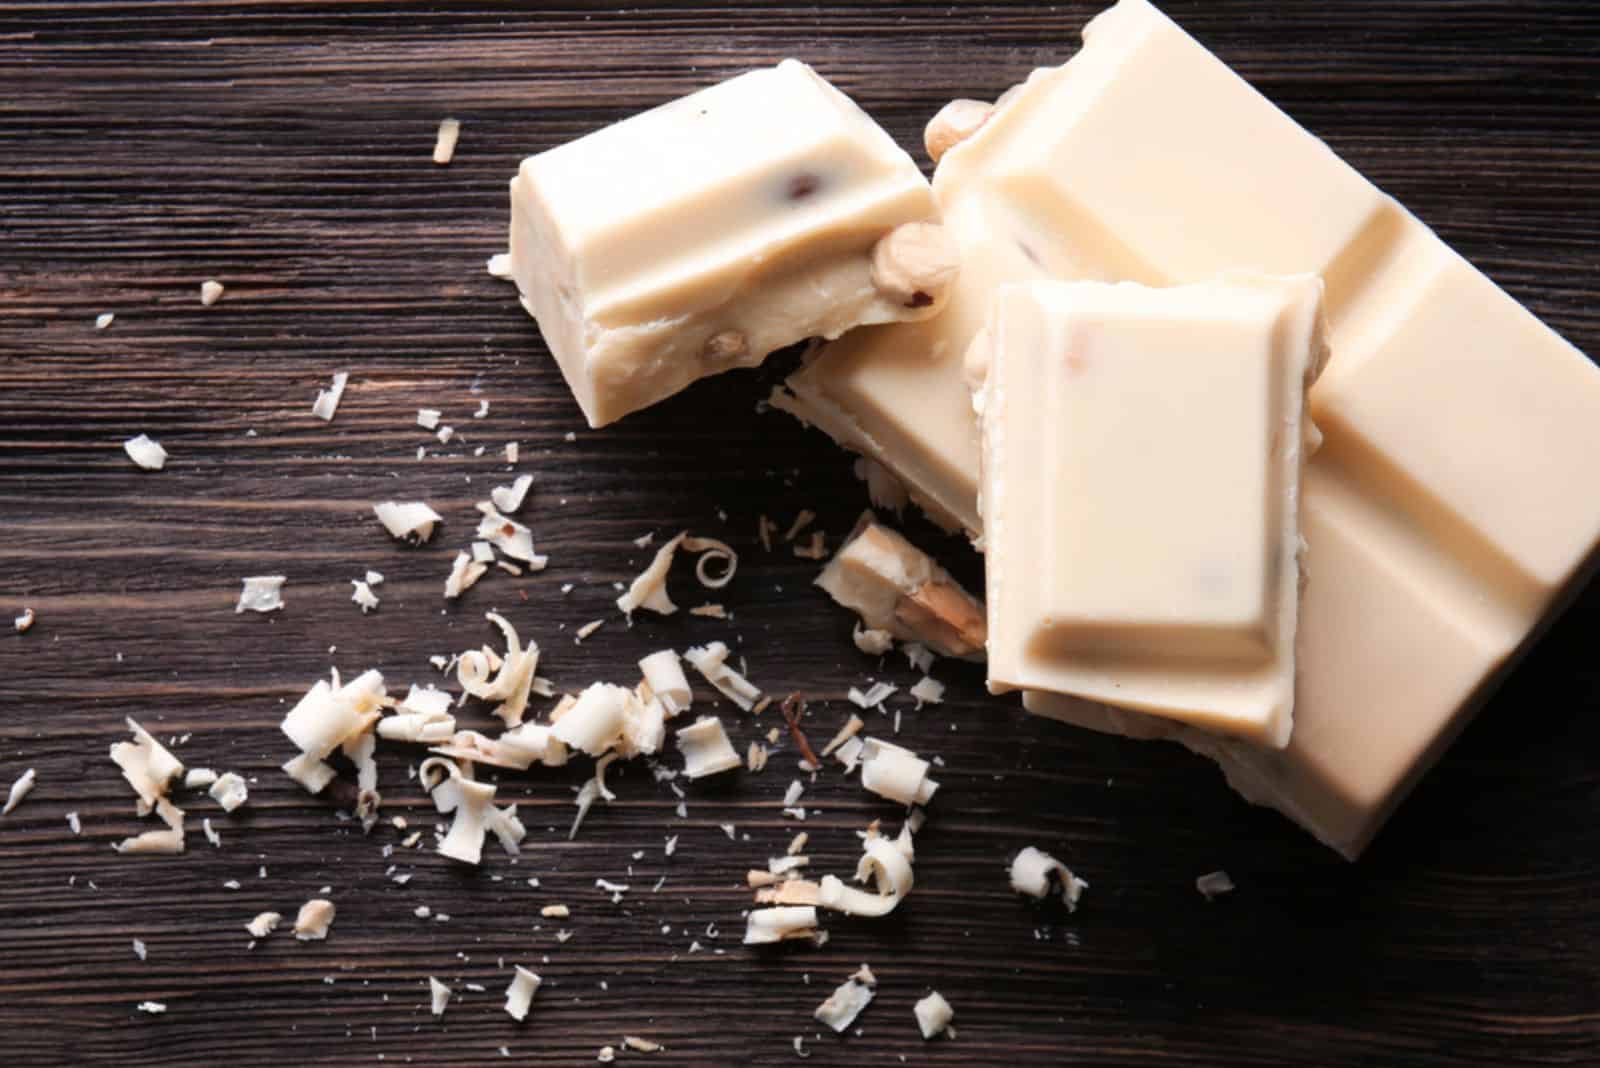 Pieces of white chocolate on wooden table
